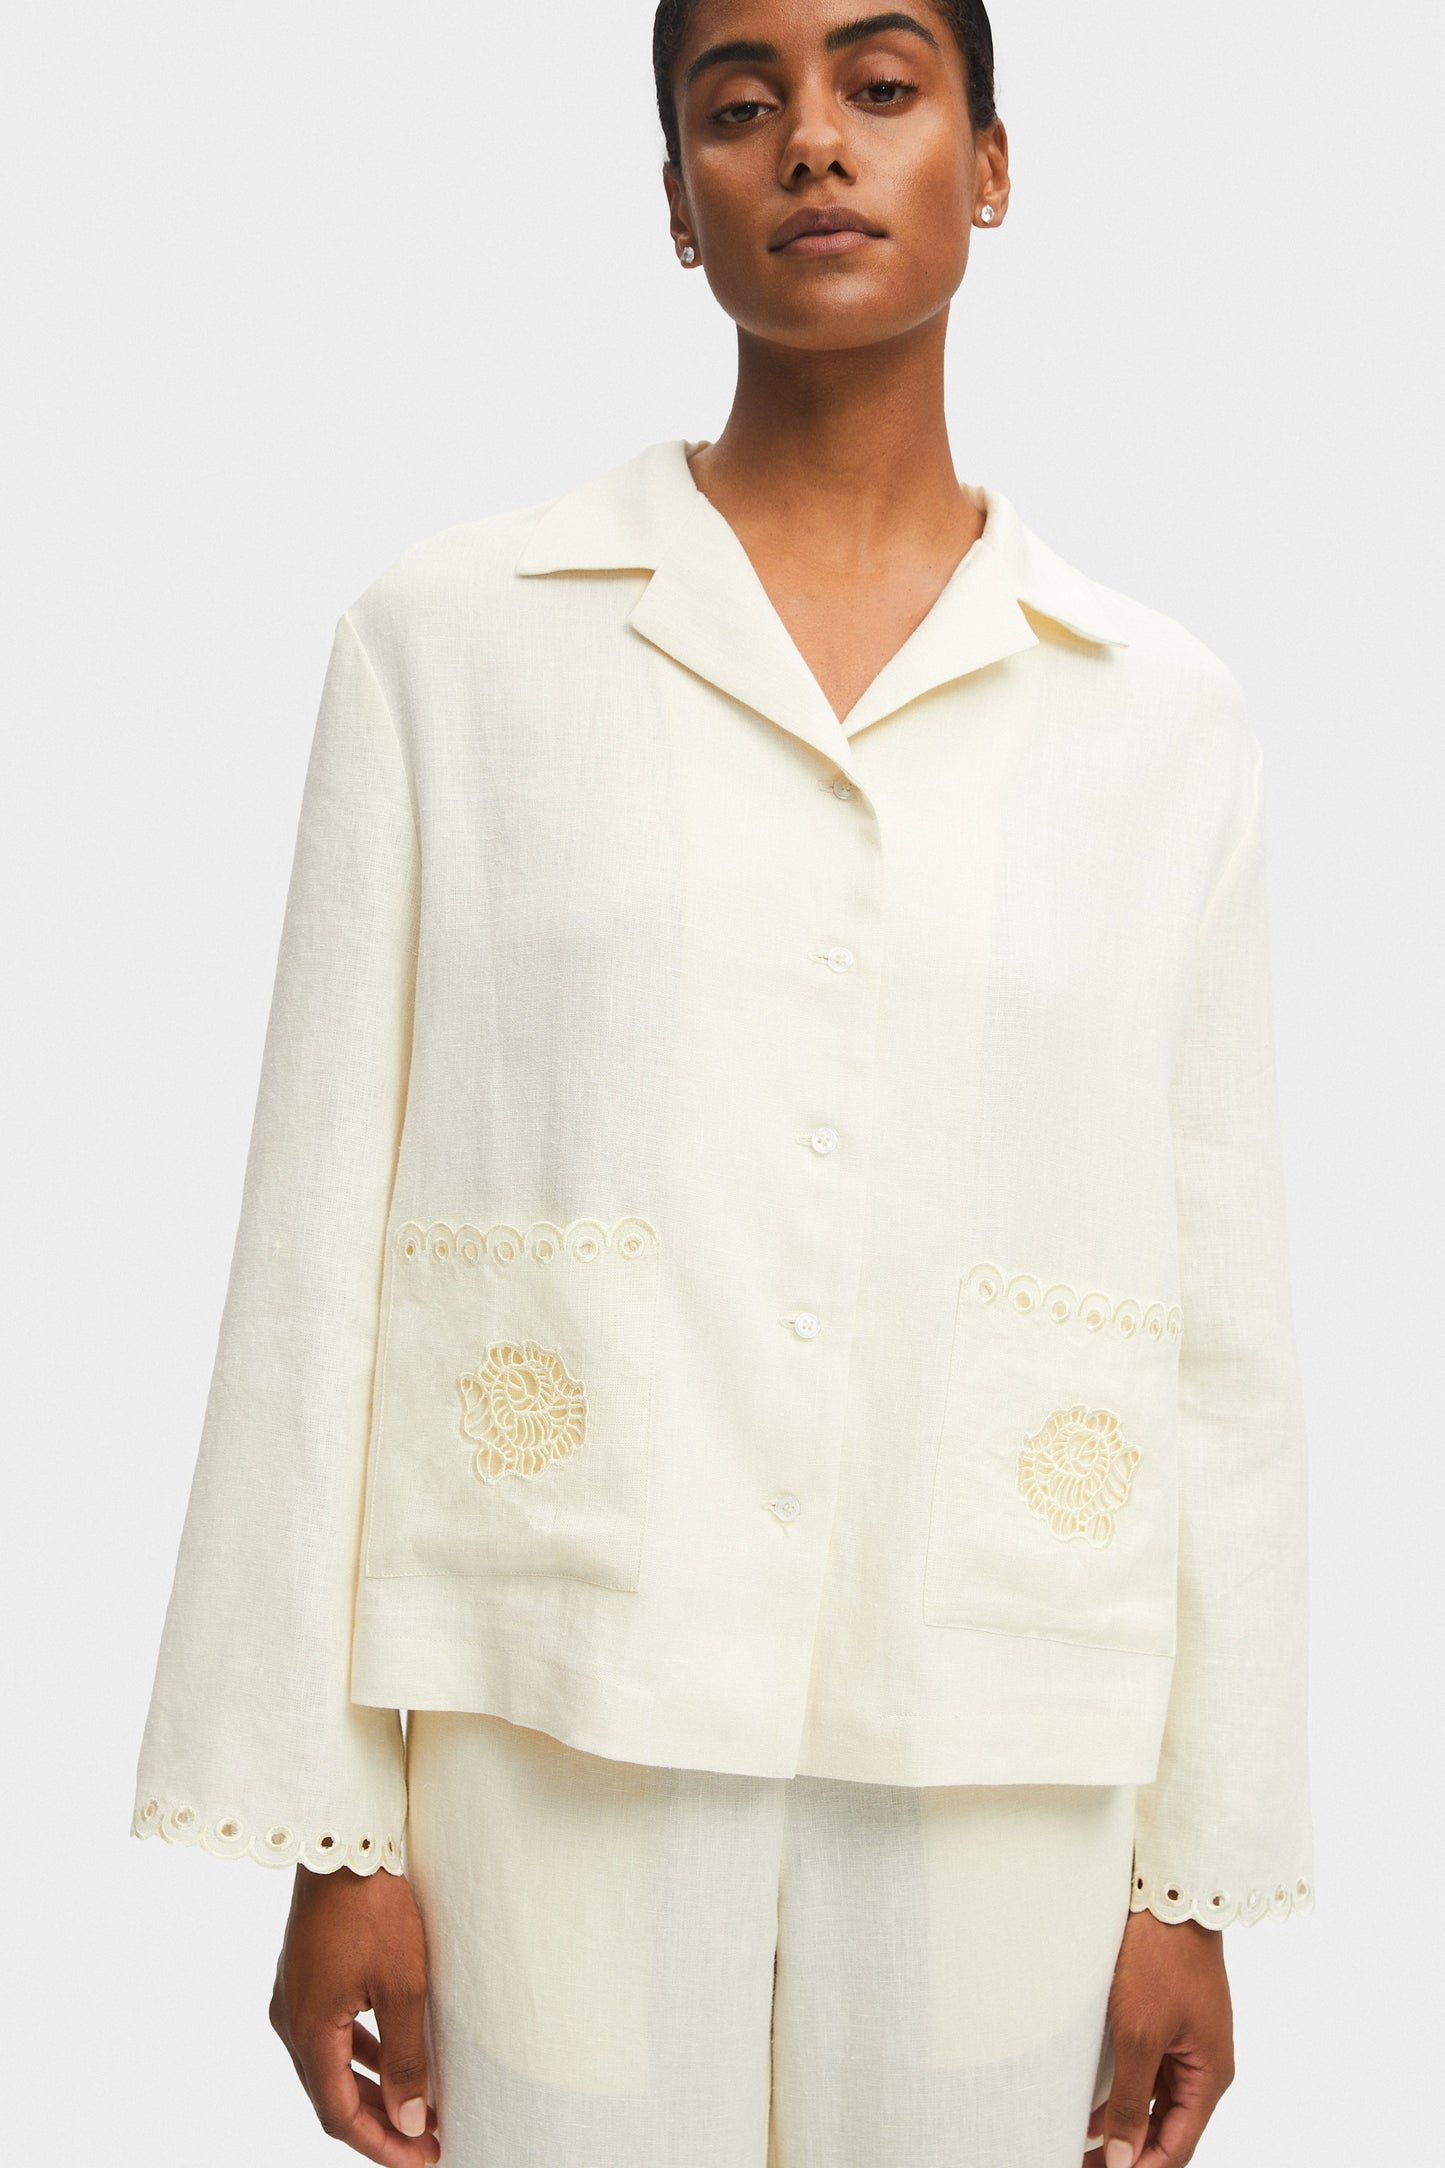 Sofia Linen Embroidered Shirt in Off-White